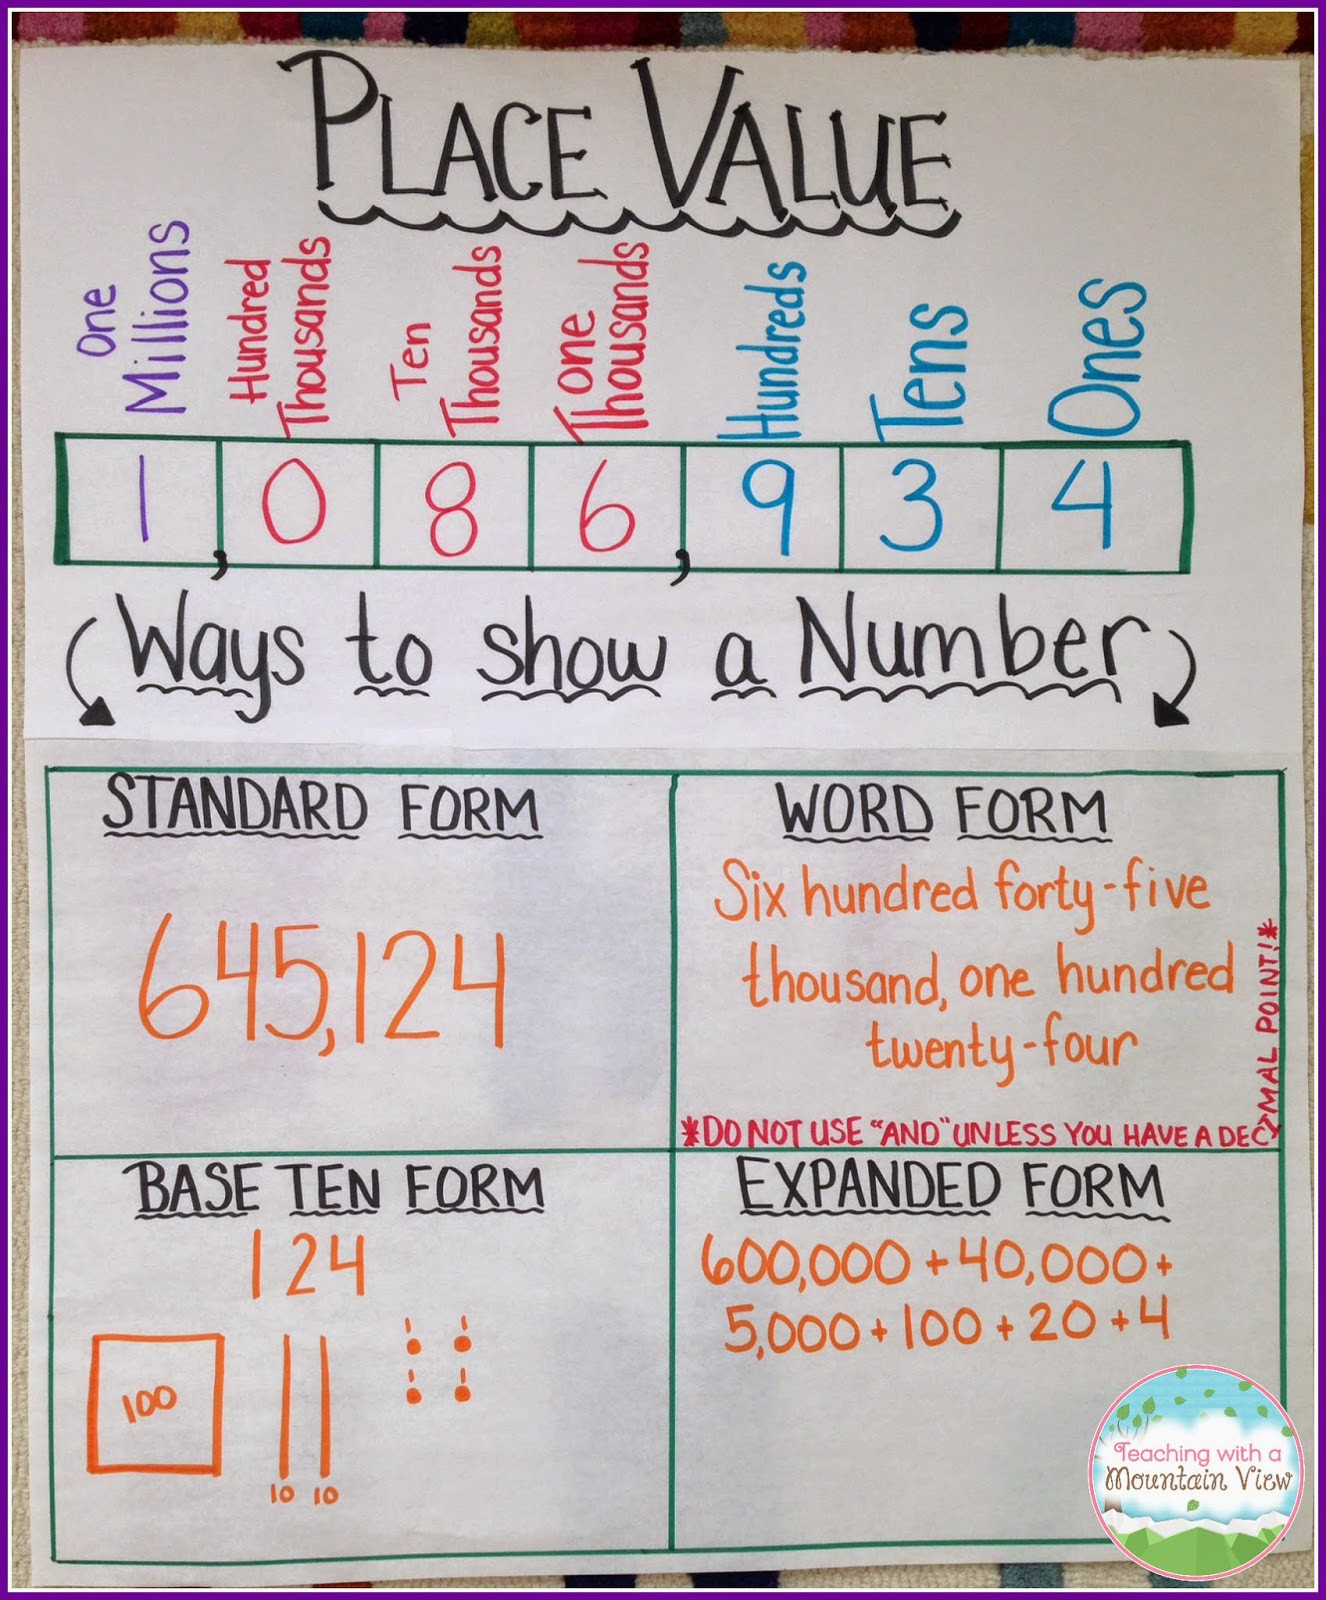 Free Math Worksheets Third Grade 3 Place Value and Rounding Round 4 Digit Numbers Nearest 100